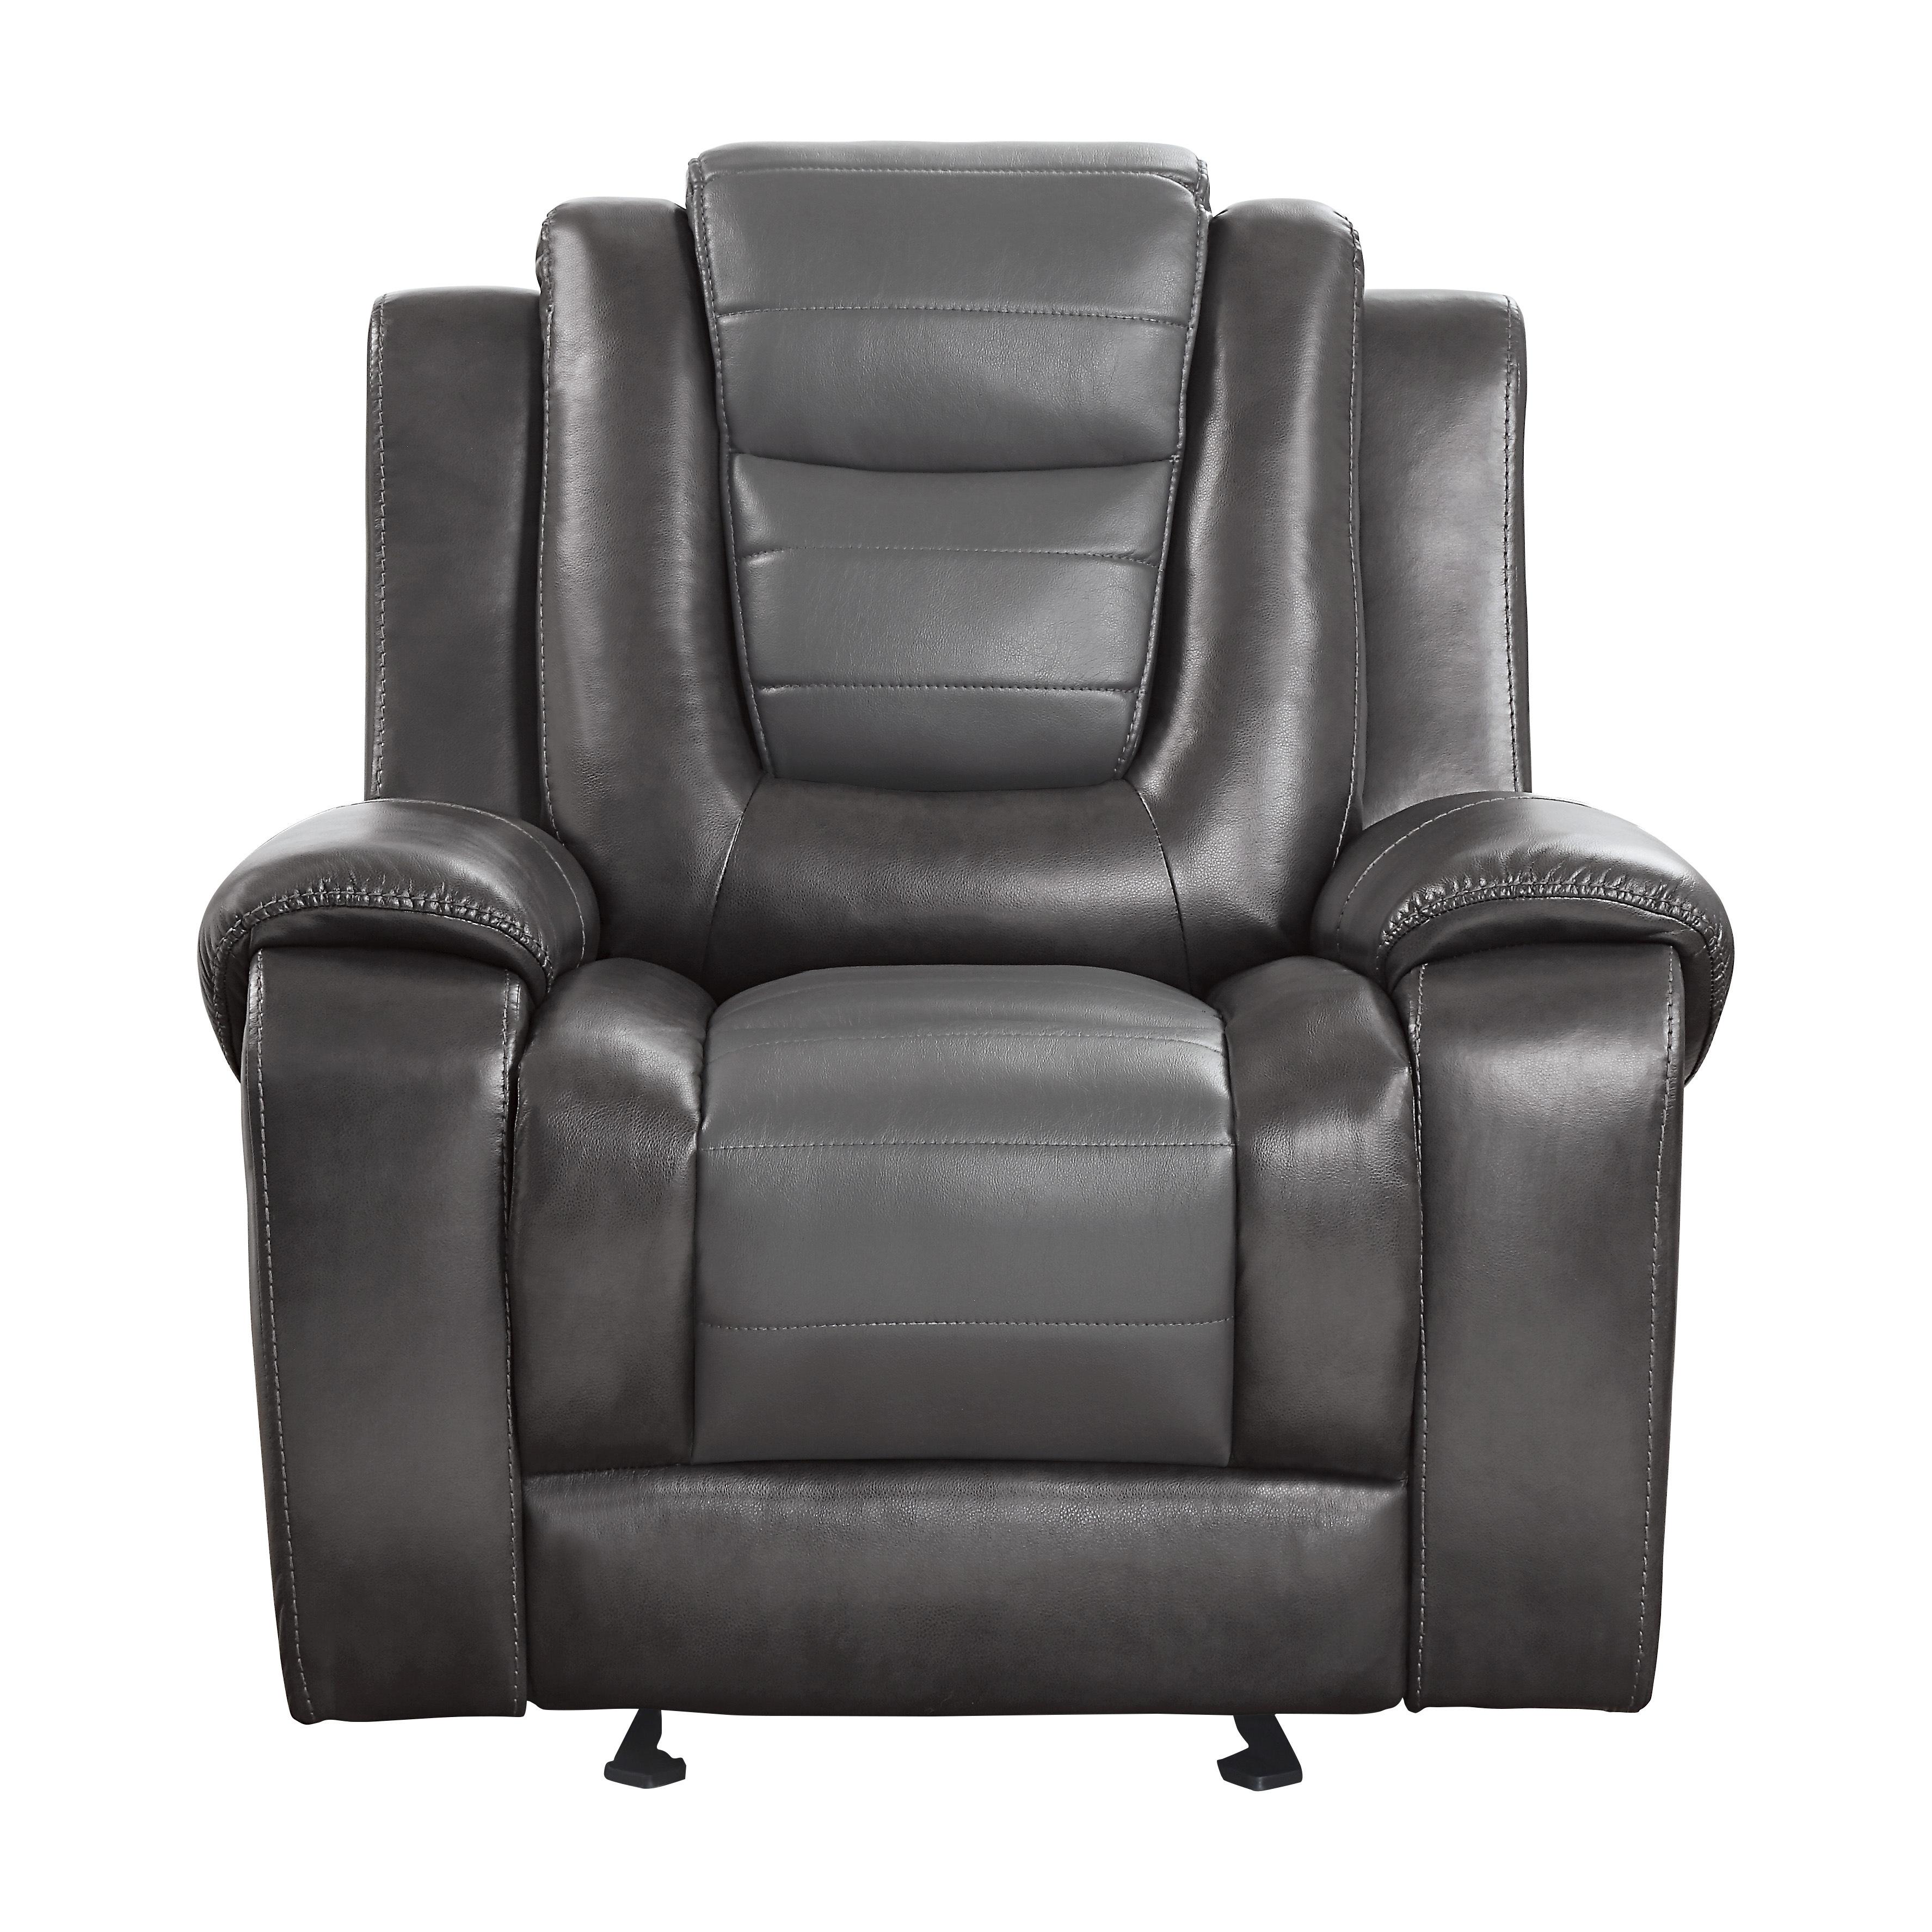 Transitional Reclining Chair 9470BR-1 Briscoe 9470BR-1 in Light Gray, Dark Gray Faux Leather